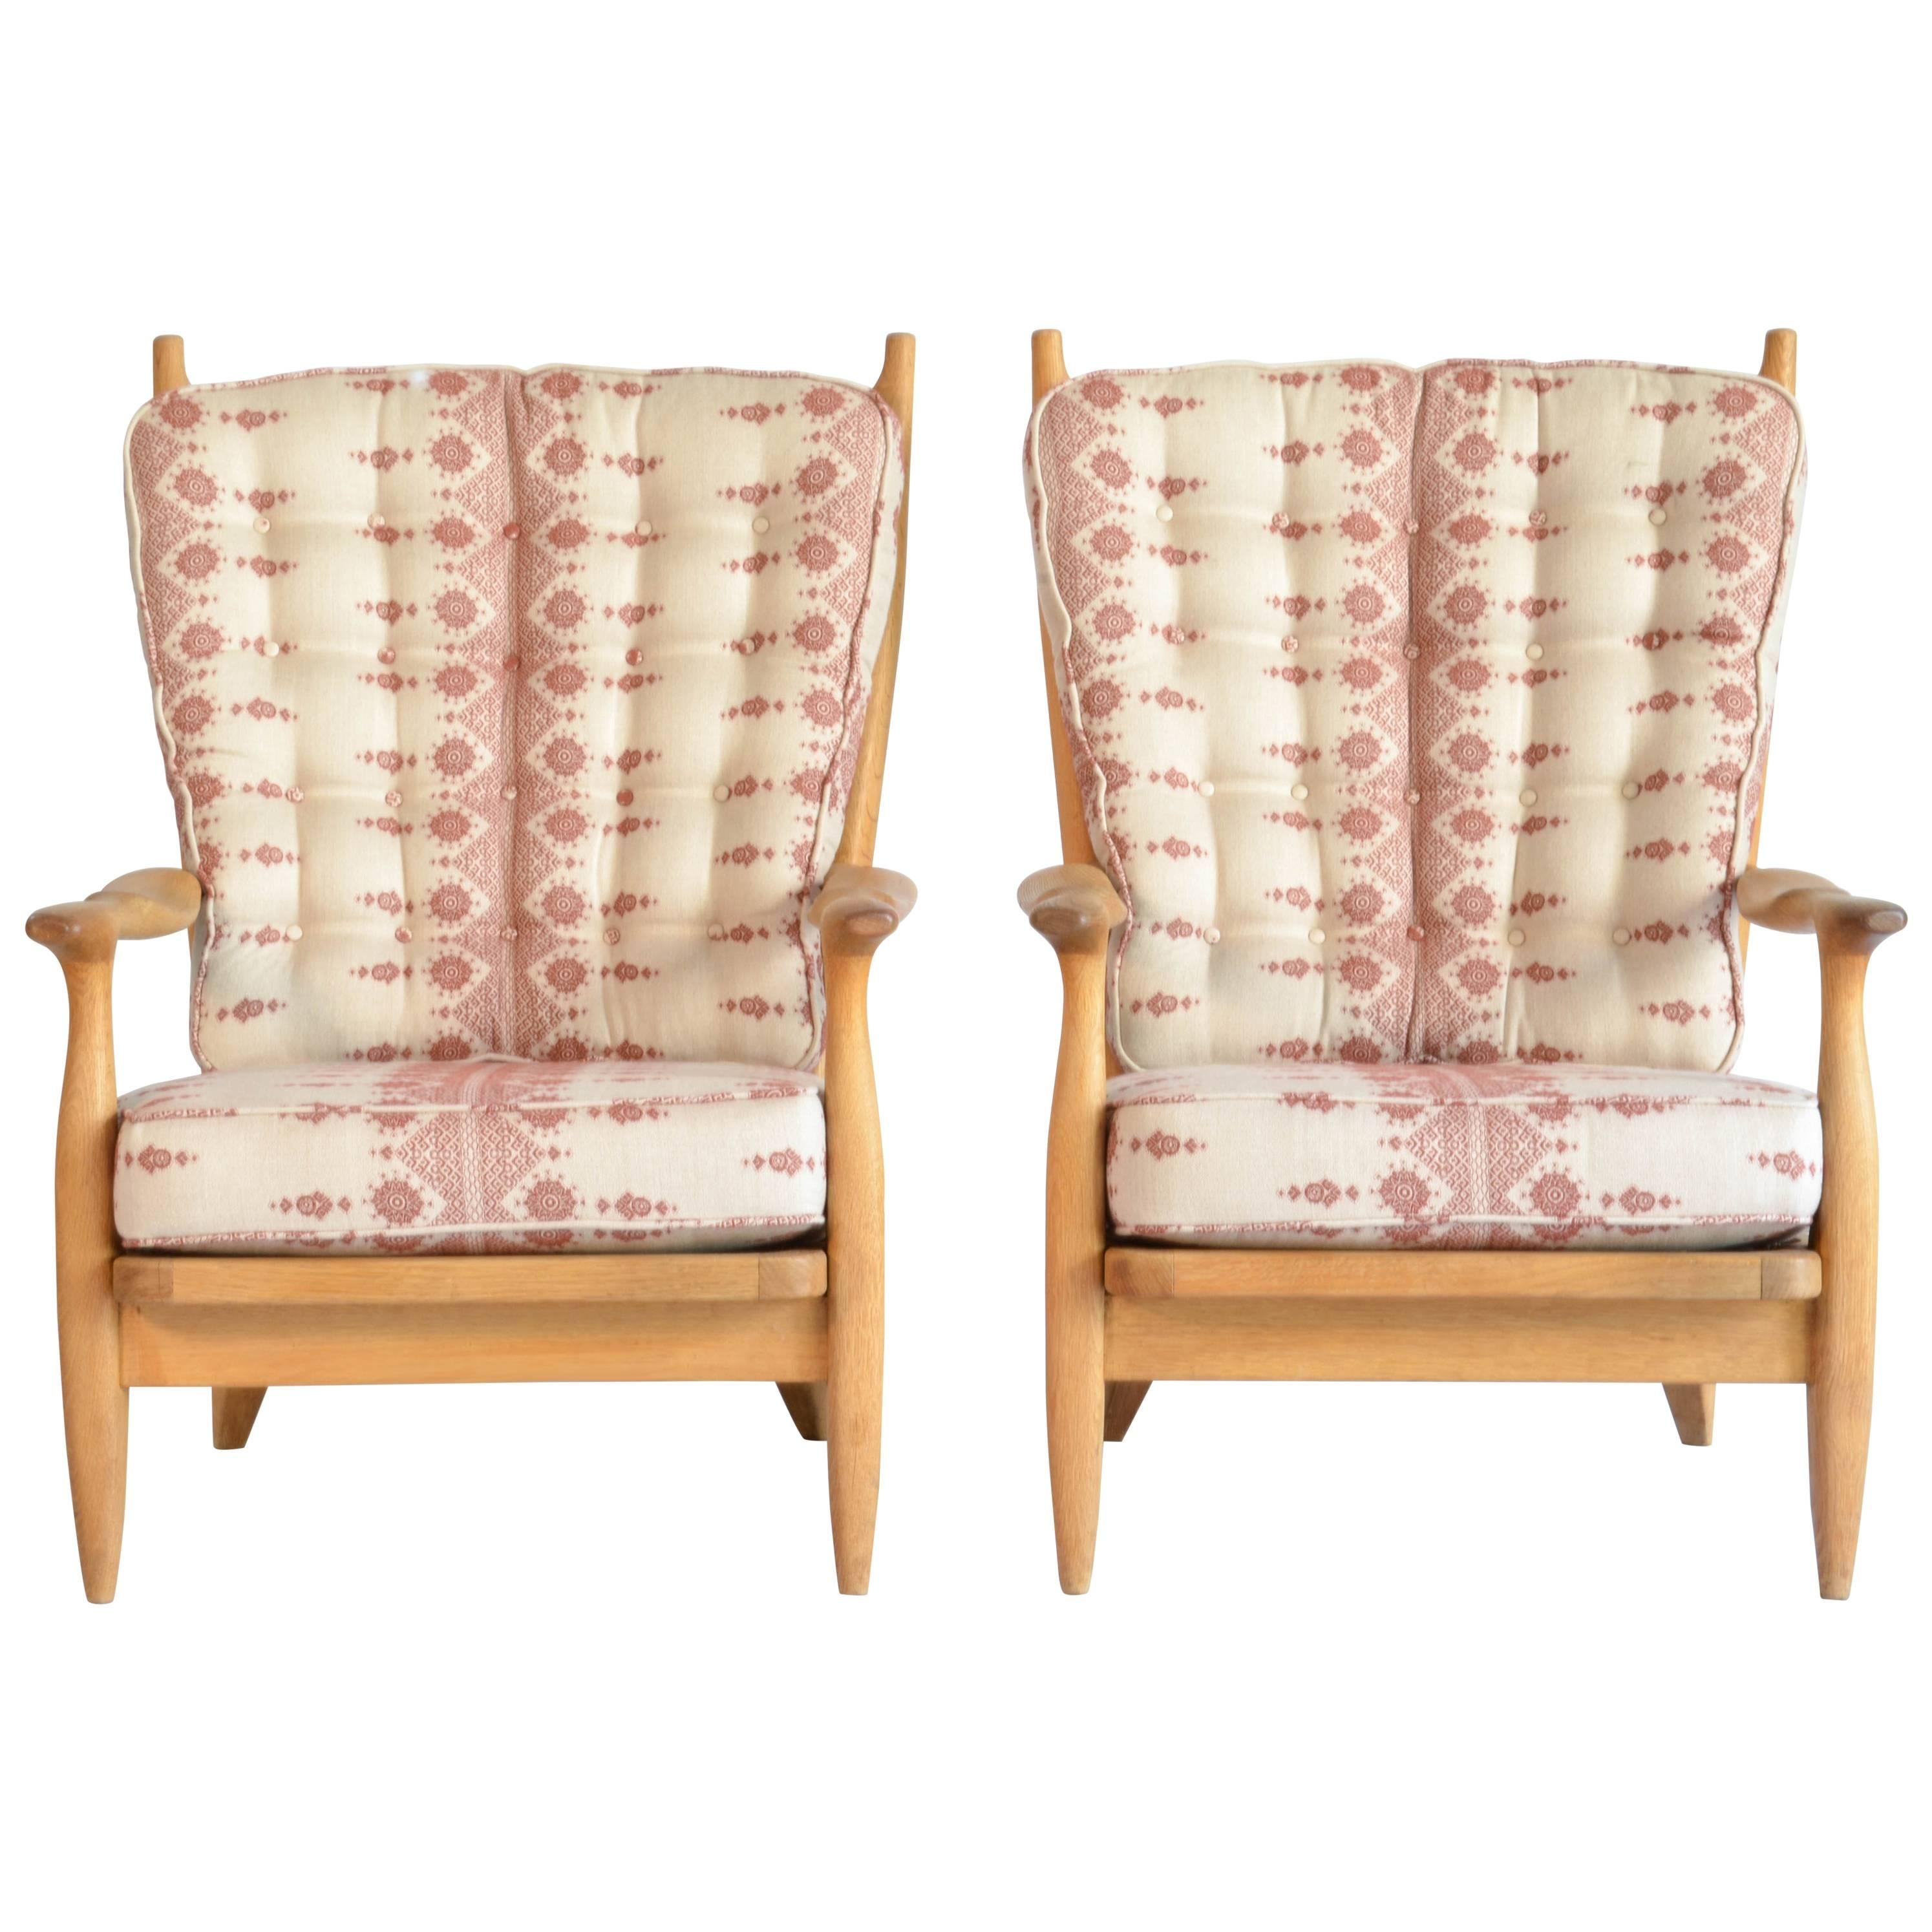 Pair of Guillerme et Chambron "Edouard" Armchairs with Newly Upholstered Cushion